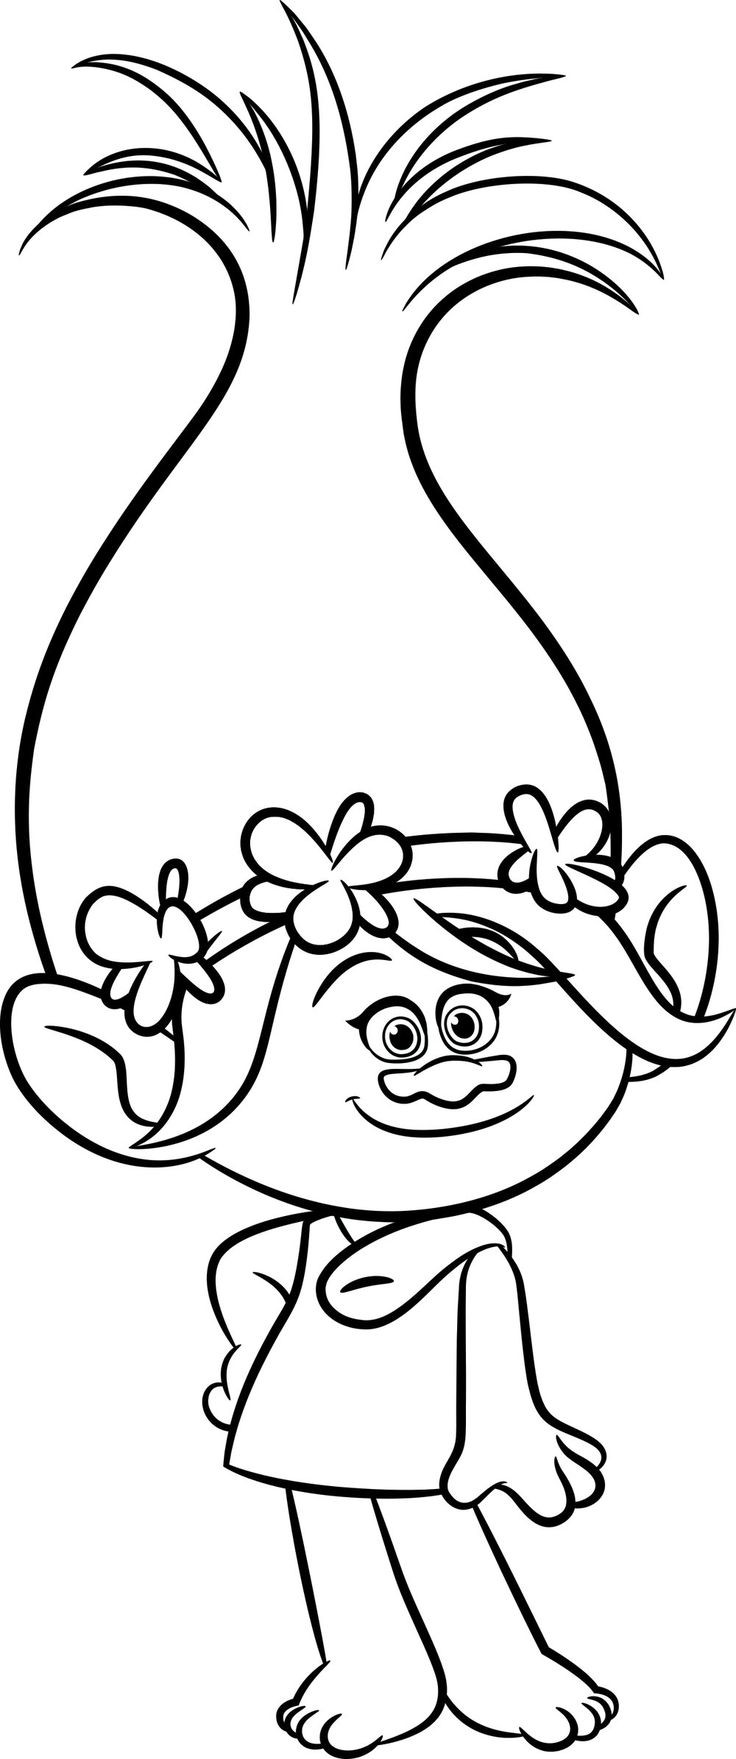 Free Printable Trolls Coloring Pages
 Bring Home Happy with DreamWorks Trolls